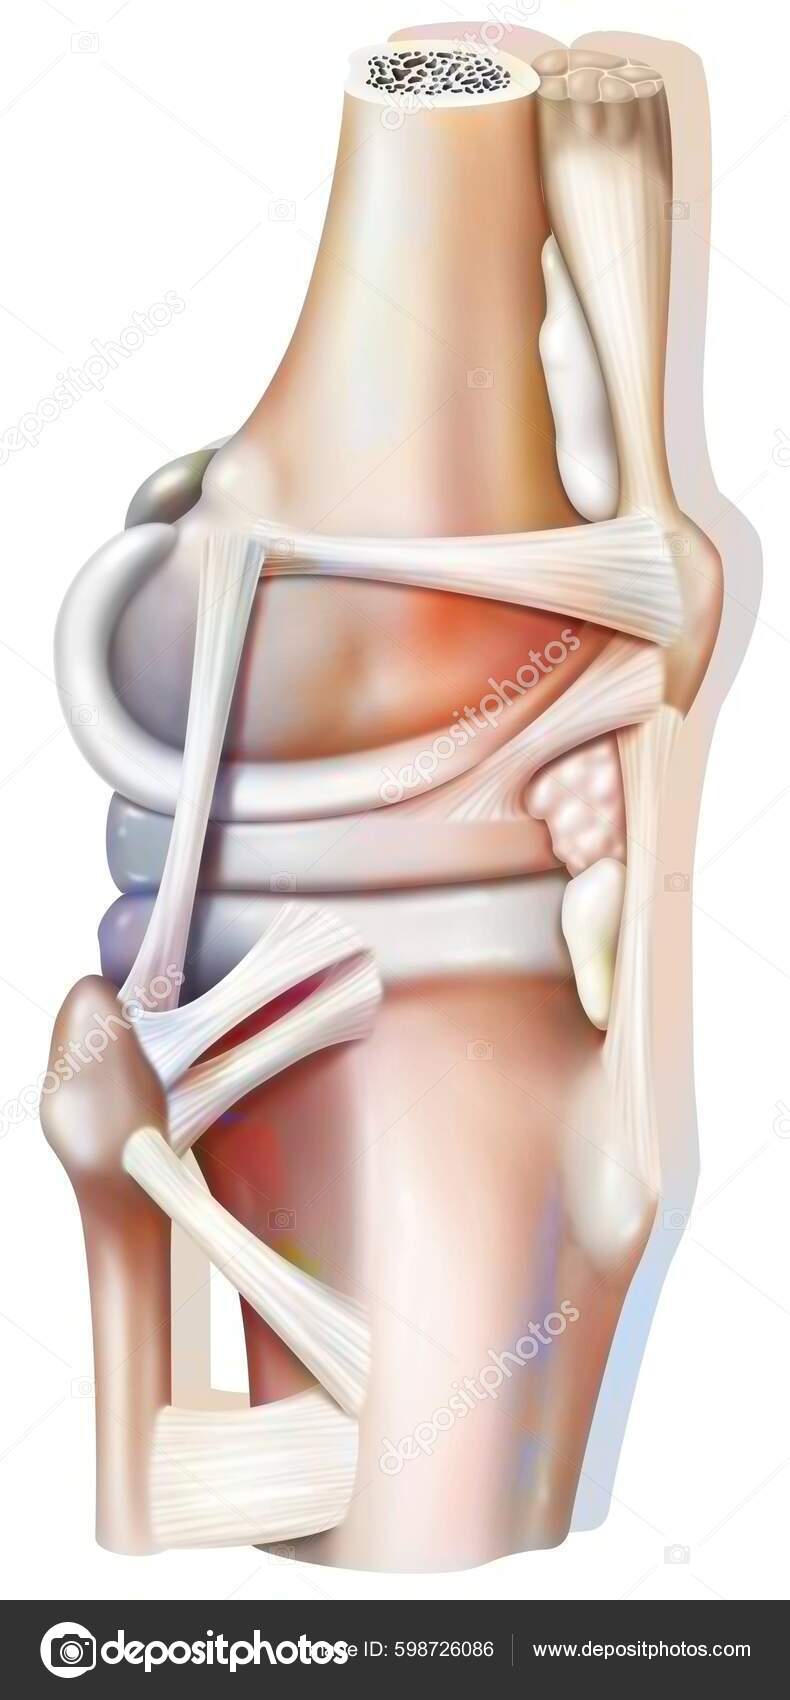 Right Knee Joint External View Ligaments Stock Photo By, 53% OFF